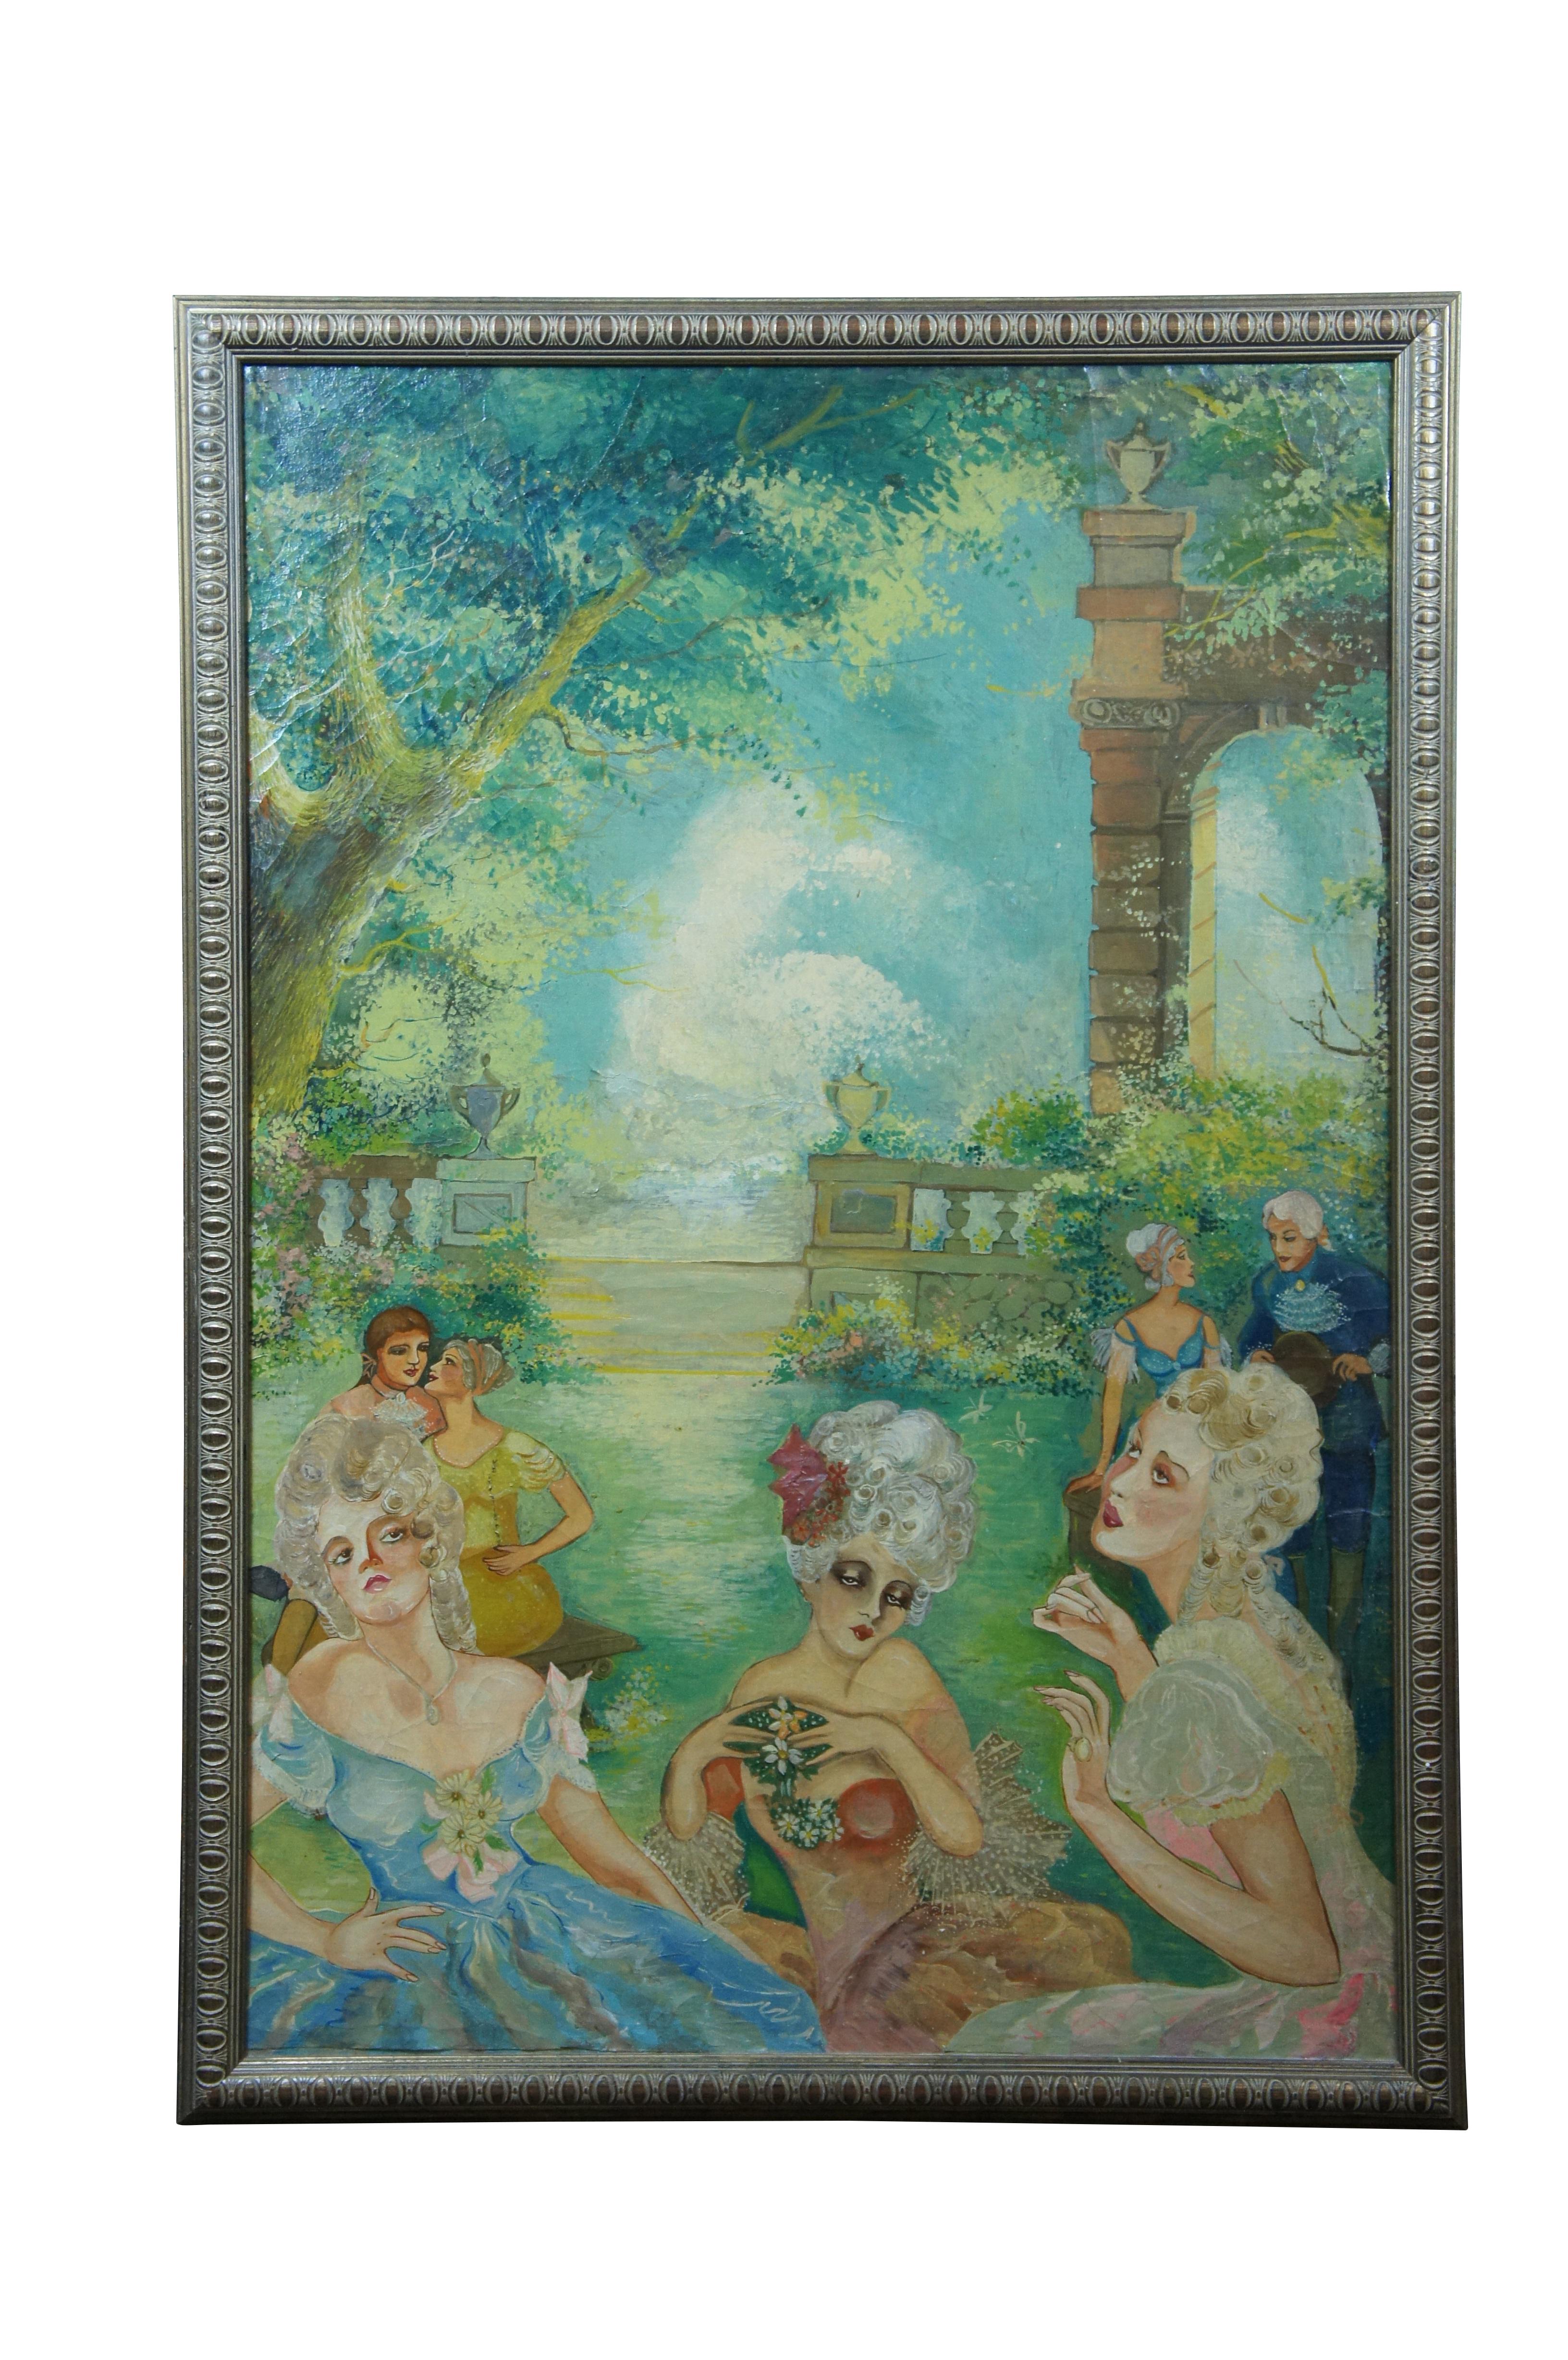 Set of three mid to late 20th century French Colonial oil paintings on board depicting an array of figures dressed for a modern imagining of a French Provincial, court of Versailles type garden party, full of seduction and debauchery. Champagne